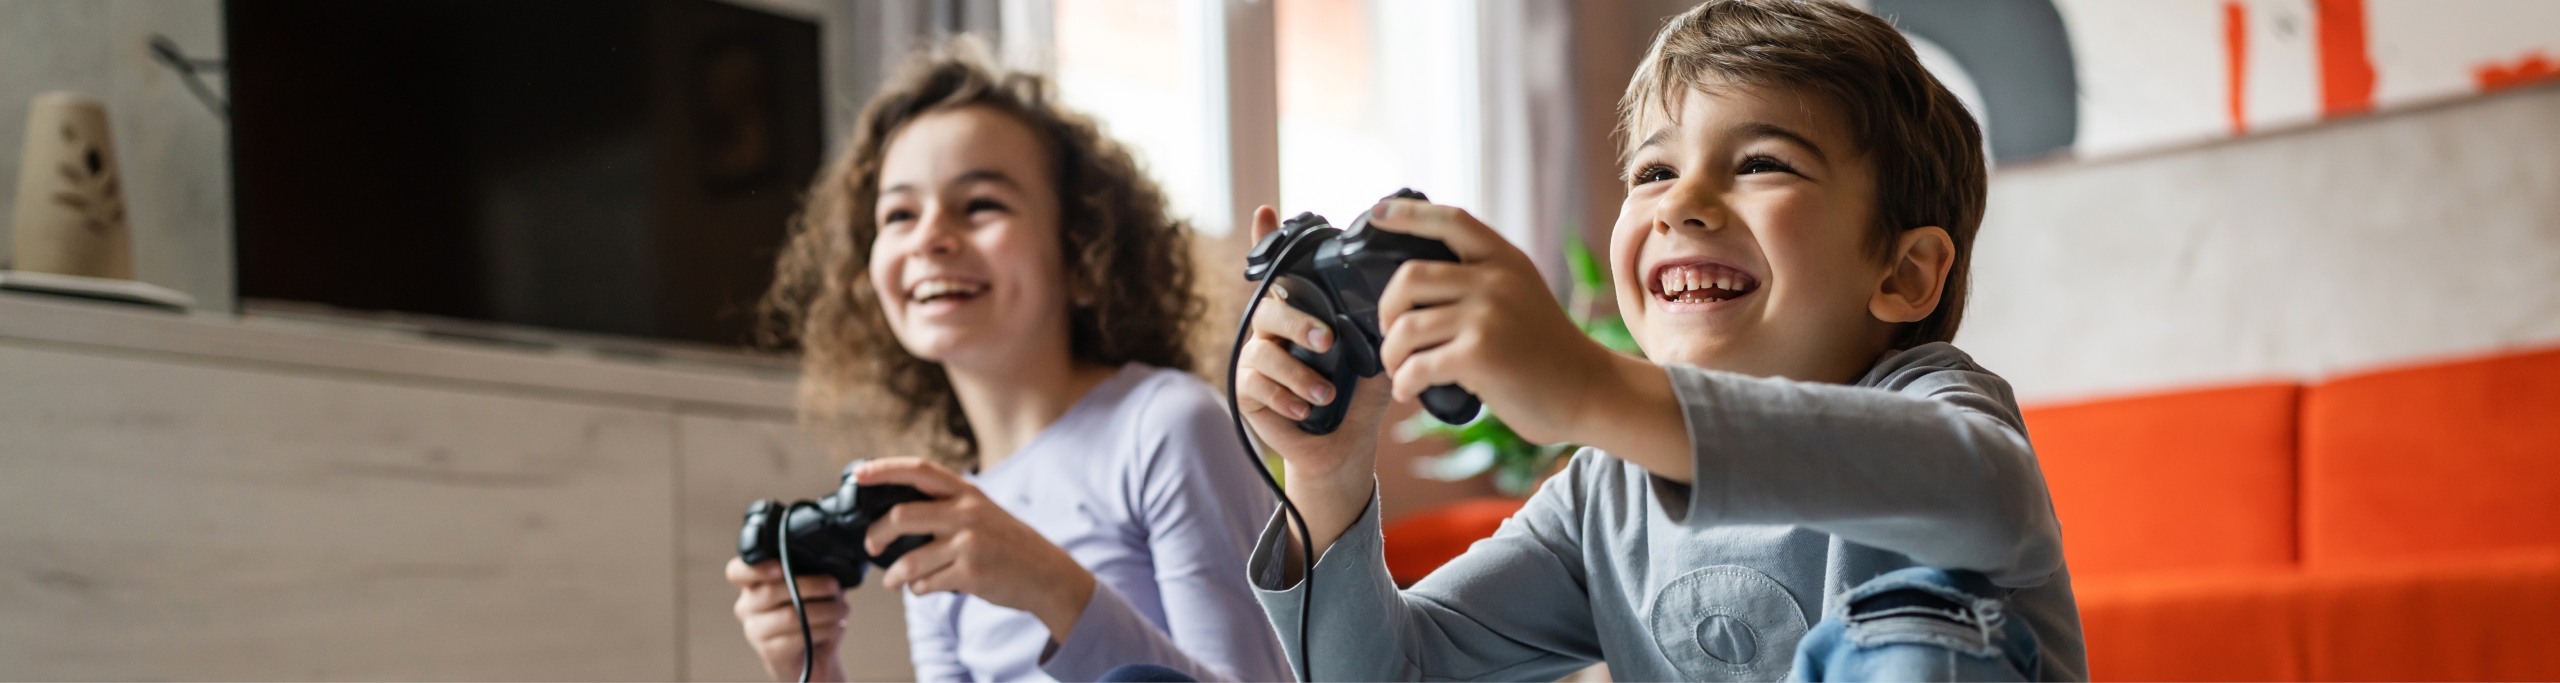 Two children playing video games in their living room.